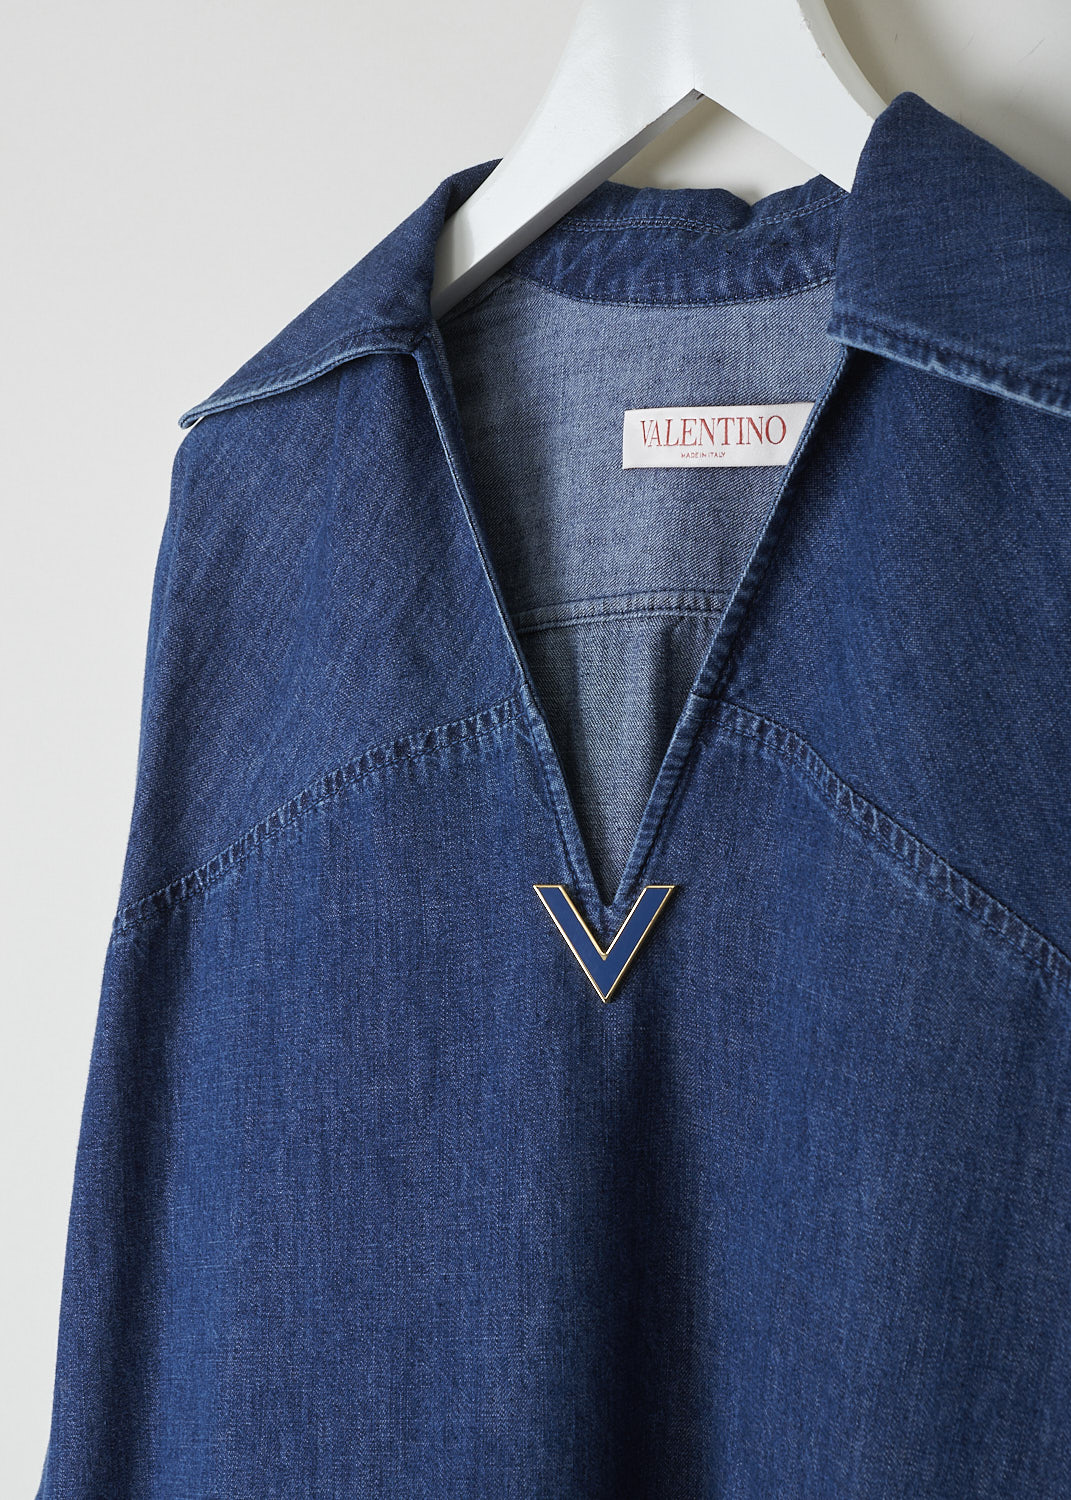 VALENTINO, DARK WASH DENIM TUNIC, XB3DB01I433_558XB3DB01I433_558, Blue, Detail, This wide tunic in a darker wash jean fabric has a spread collar with a V-neckline. The end of the V-neck is decorated with the brands signature V. The tunic has three-quarter raglan sleeves with buttoned cuffs. Slanted pockets can be found concealed in the side seams. The tunic has an asymmetrical finish, meaning the back is a little longer than the front. Small slits can be found on either side. 
